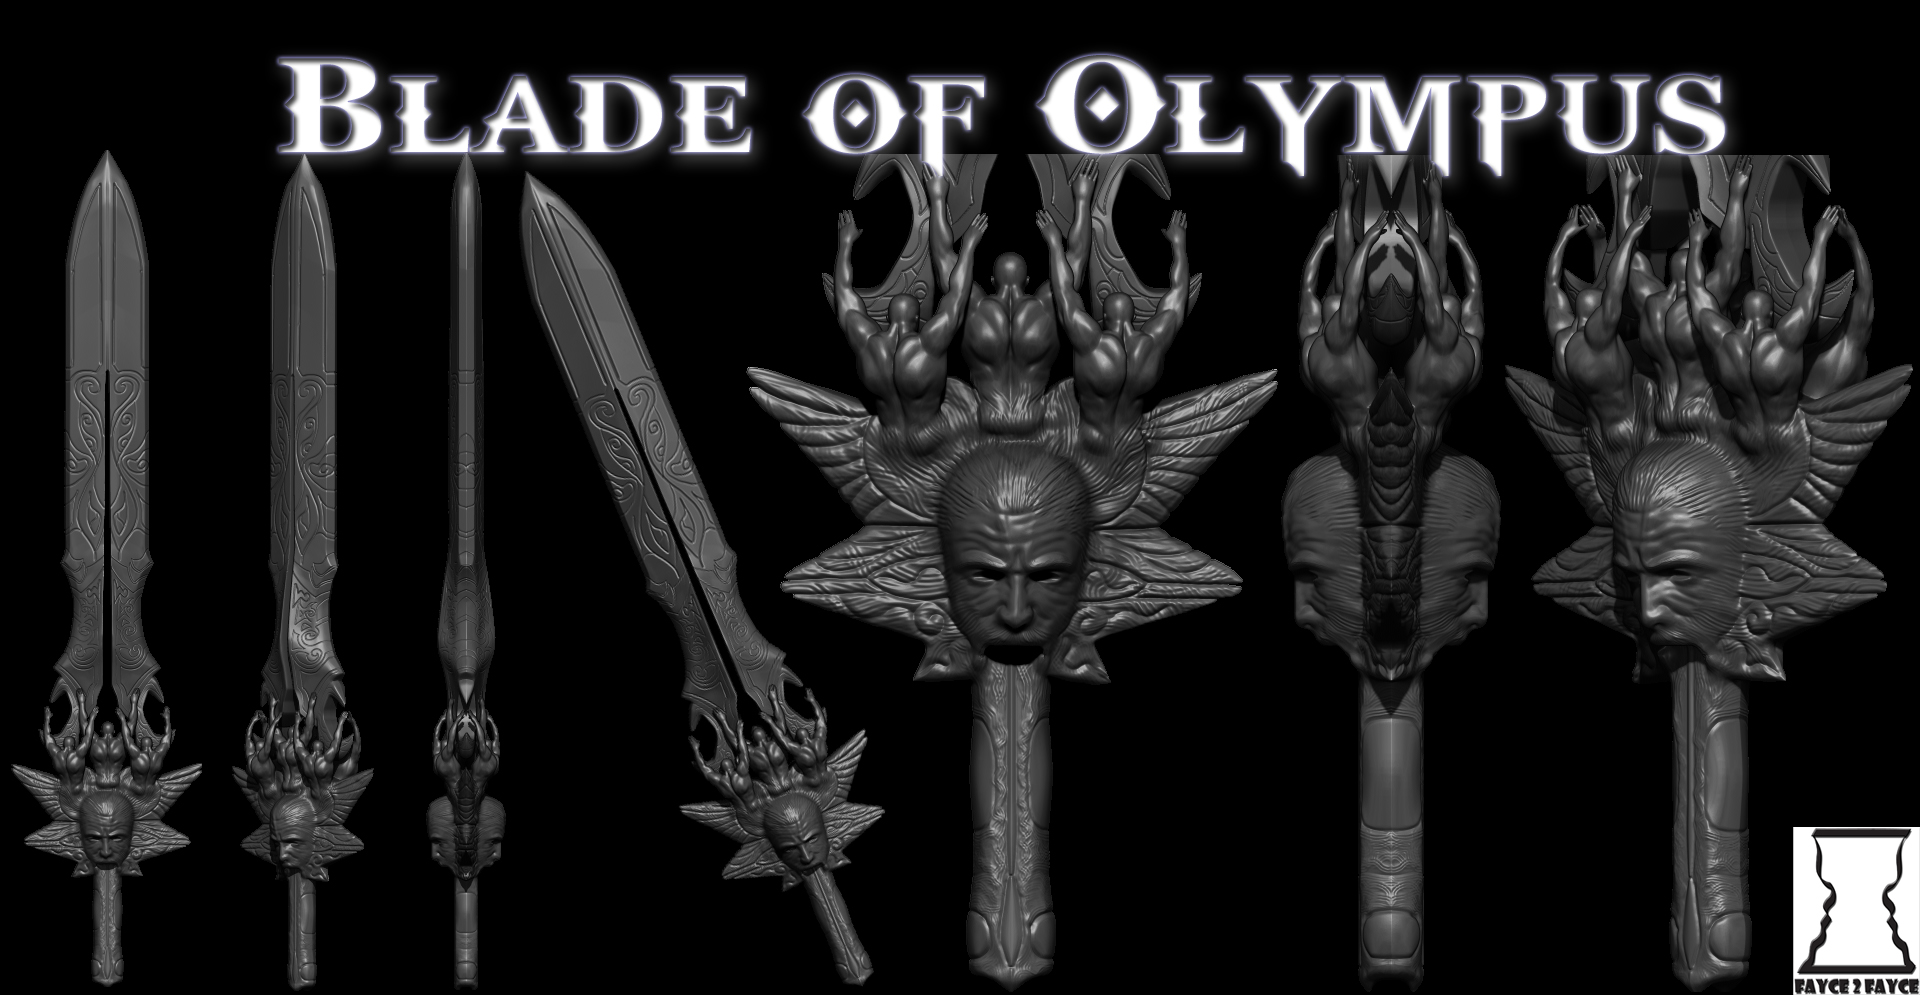 Kratos (God of War) with Blade of Olympus